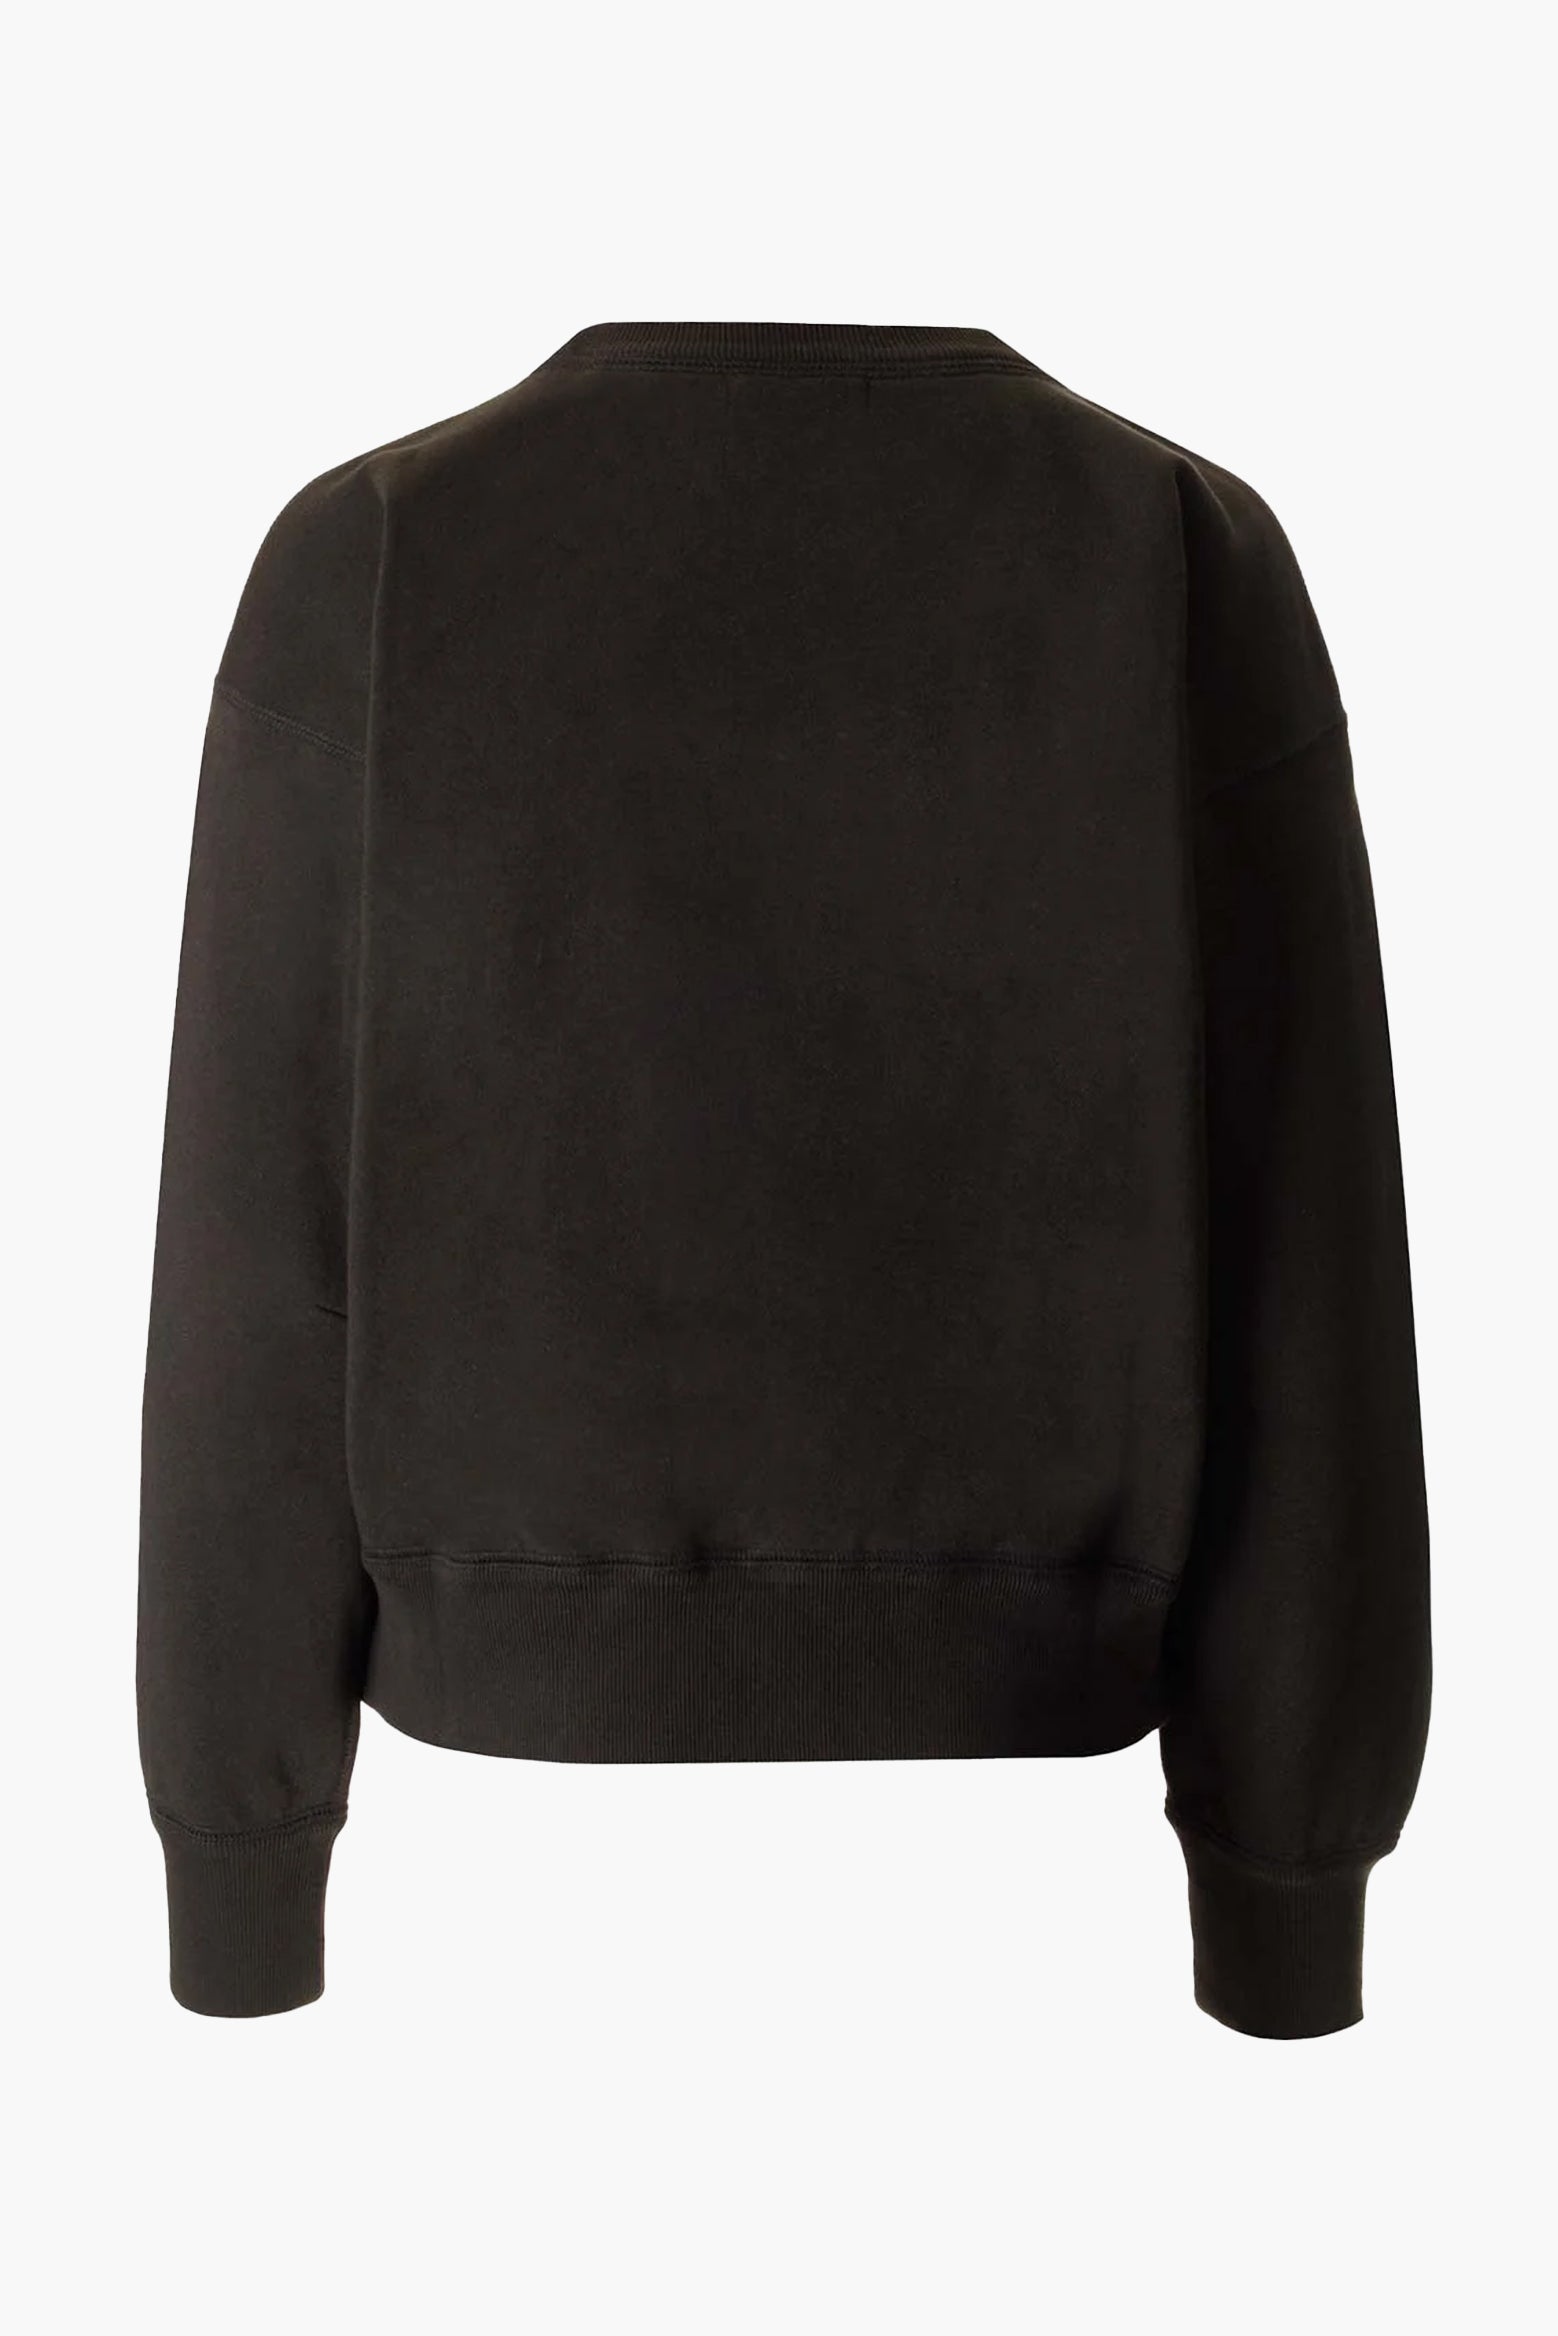 ISABEL MARANT Mobyli Sweatshirt in Faded Black | The New Trend